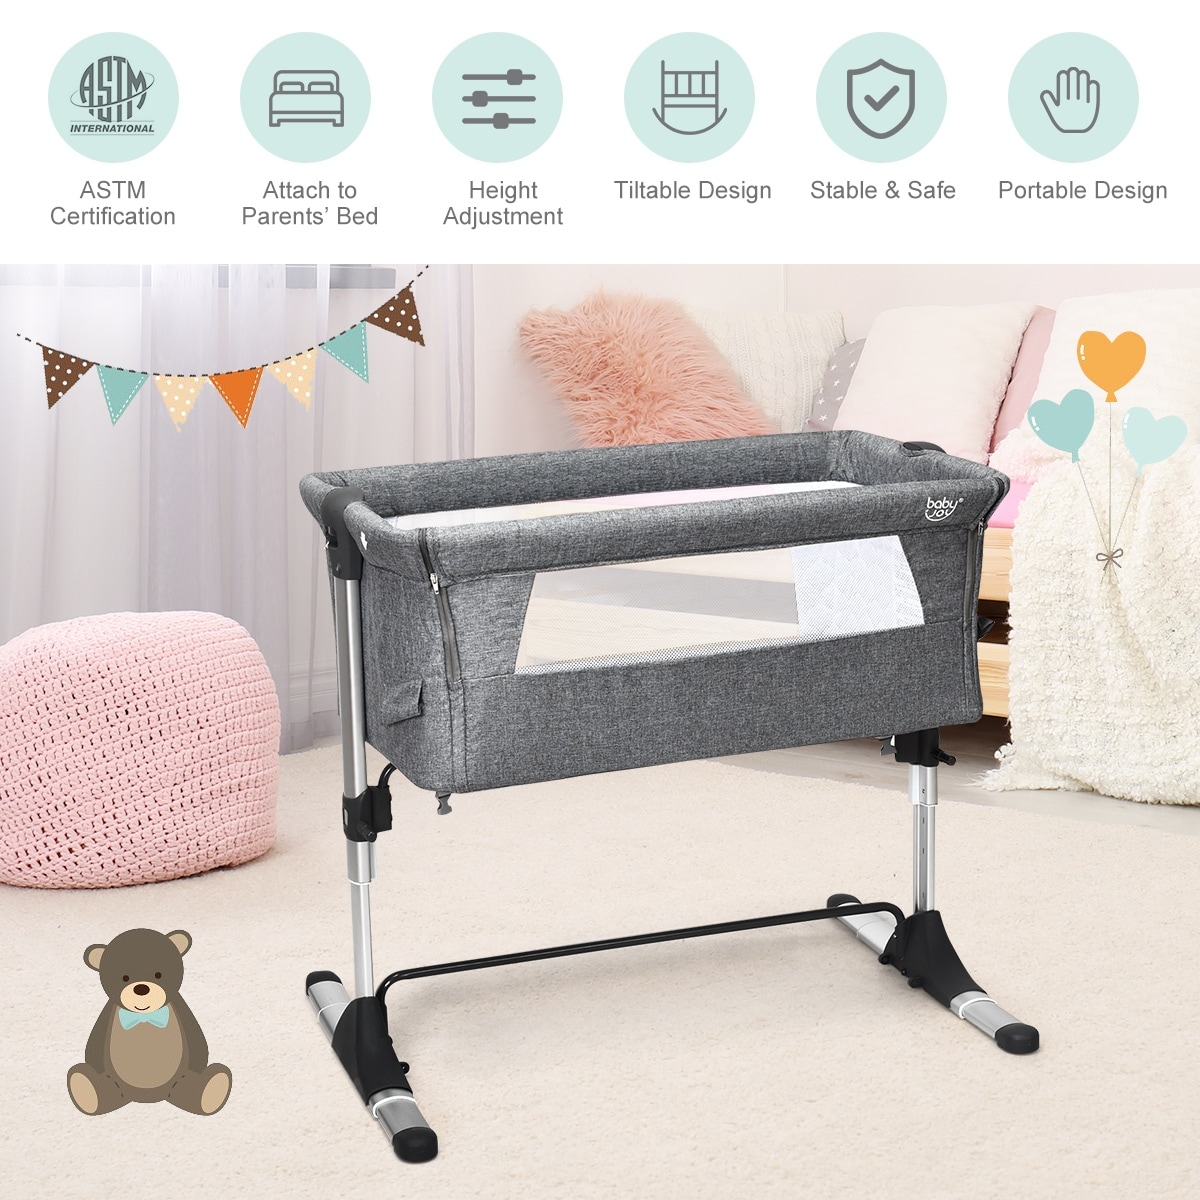 bassinet that attaches to bed